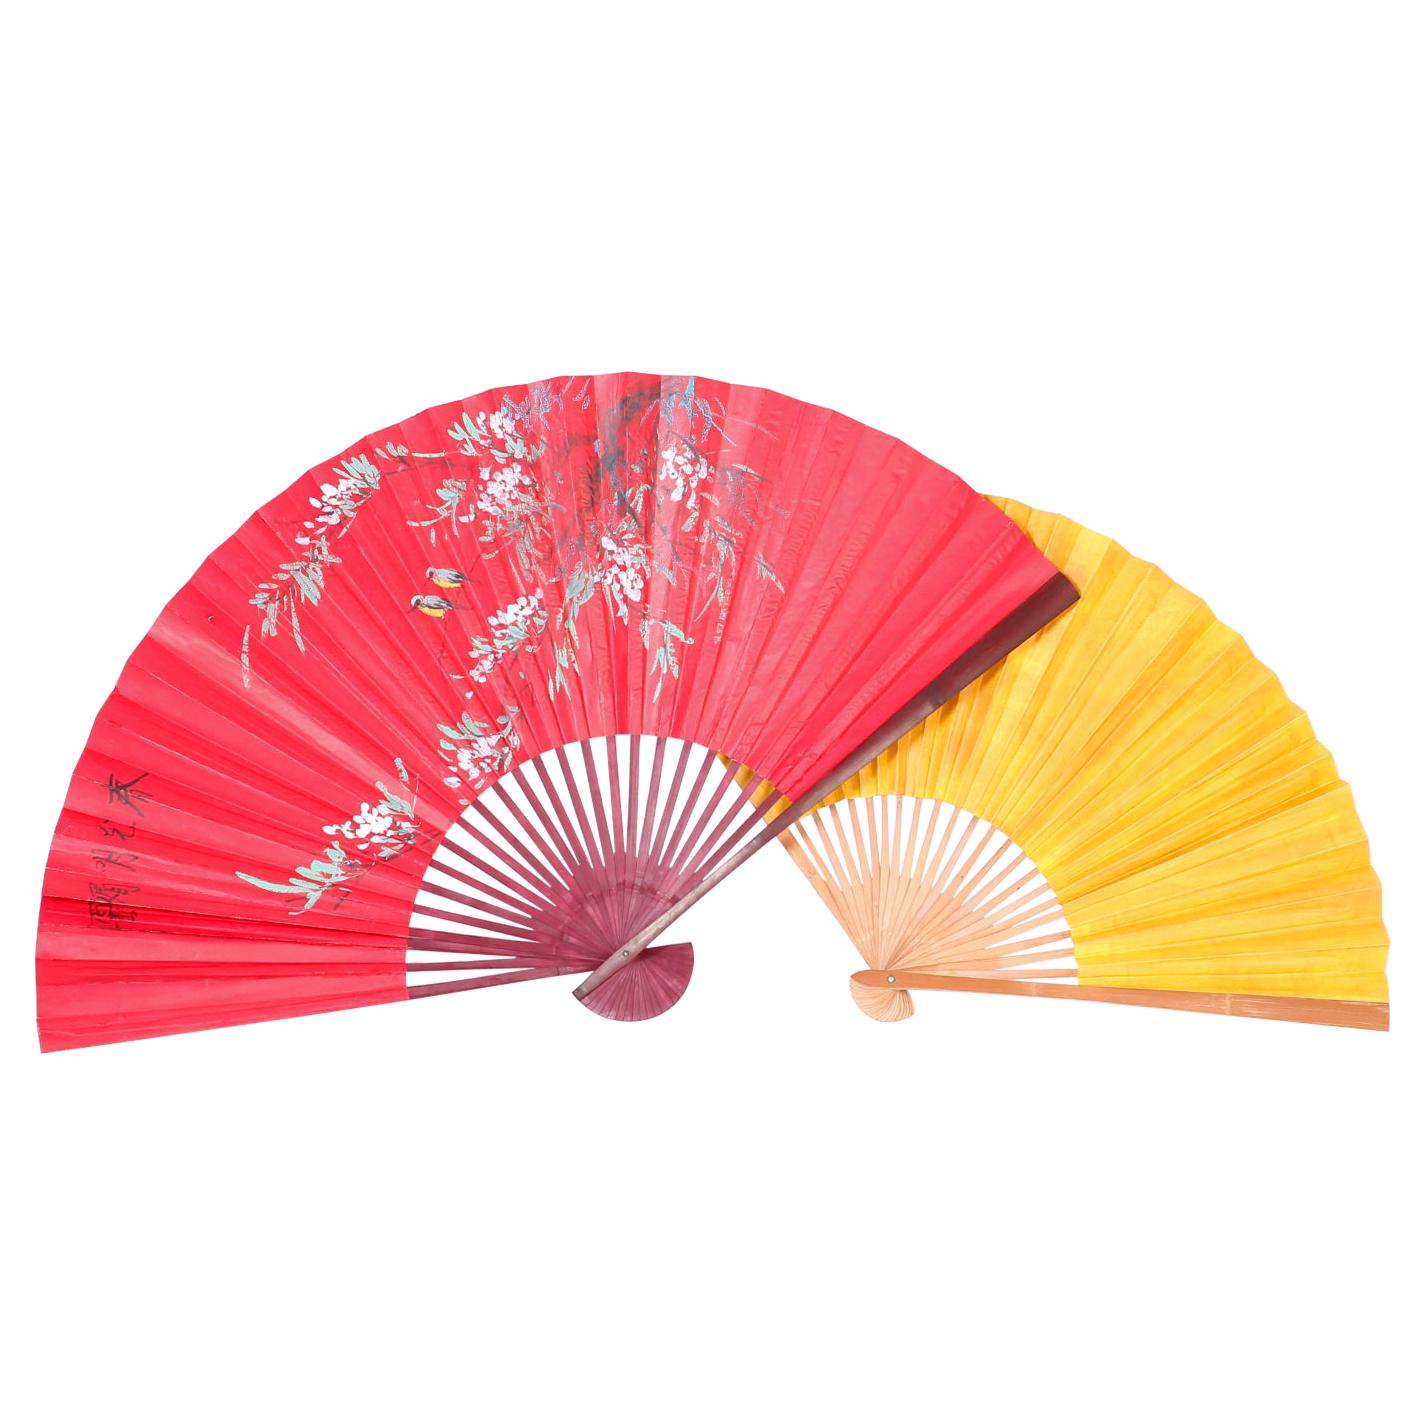 Two Large Vintage Japanese Paper Fans, Priced Individually